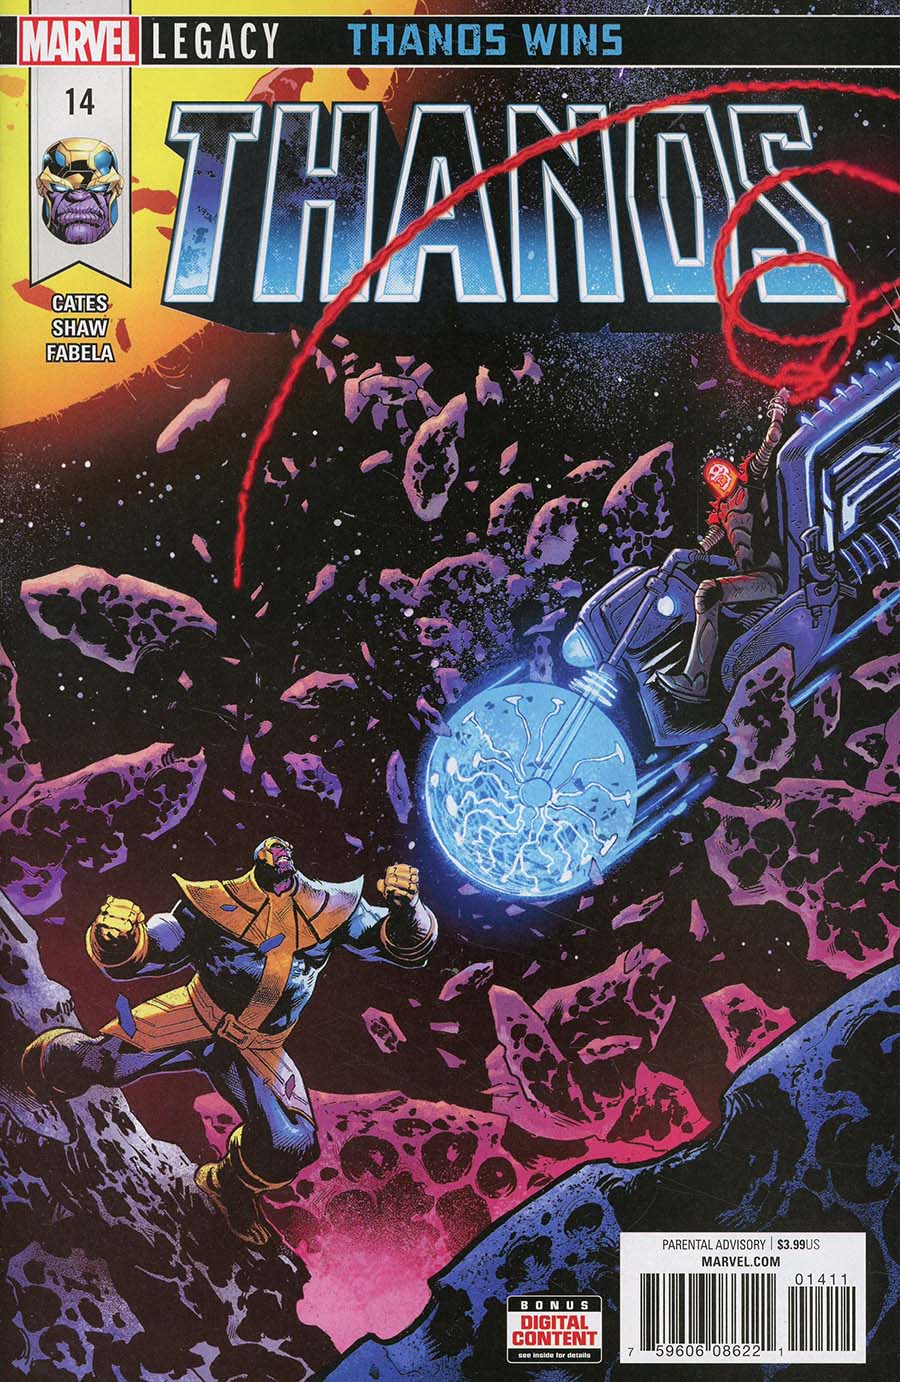 Thanos Vol 2 #14 Cover A 1st Ptg Regular Geoff Shaw Cover (Marvel Legacy Tie-In)